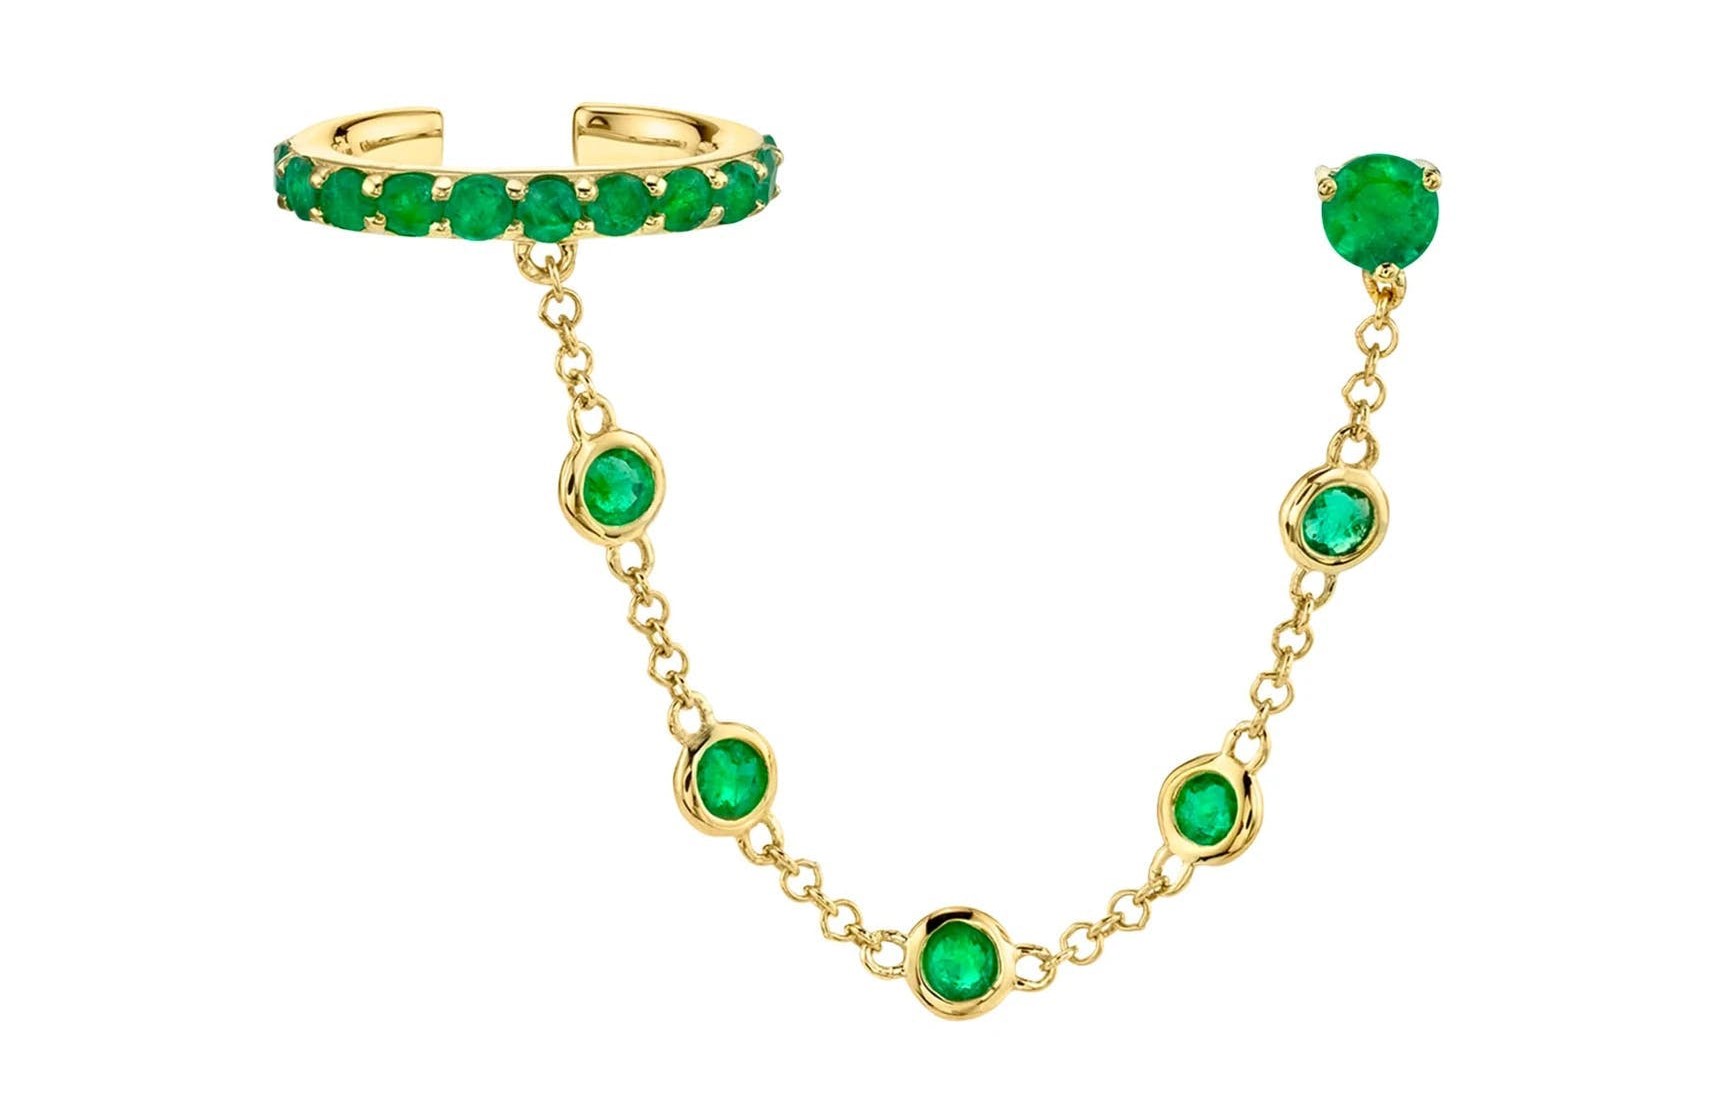 Emerald jewelry designs for May - June